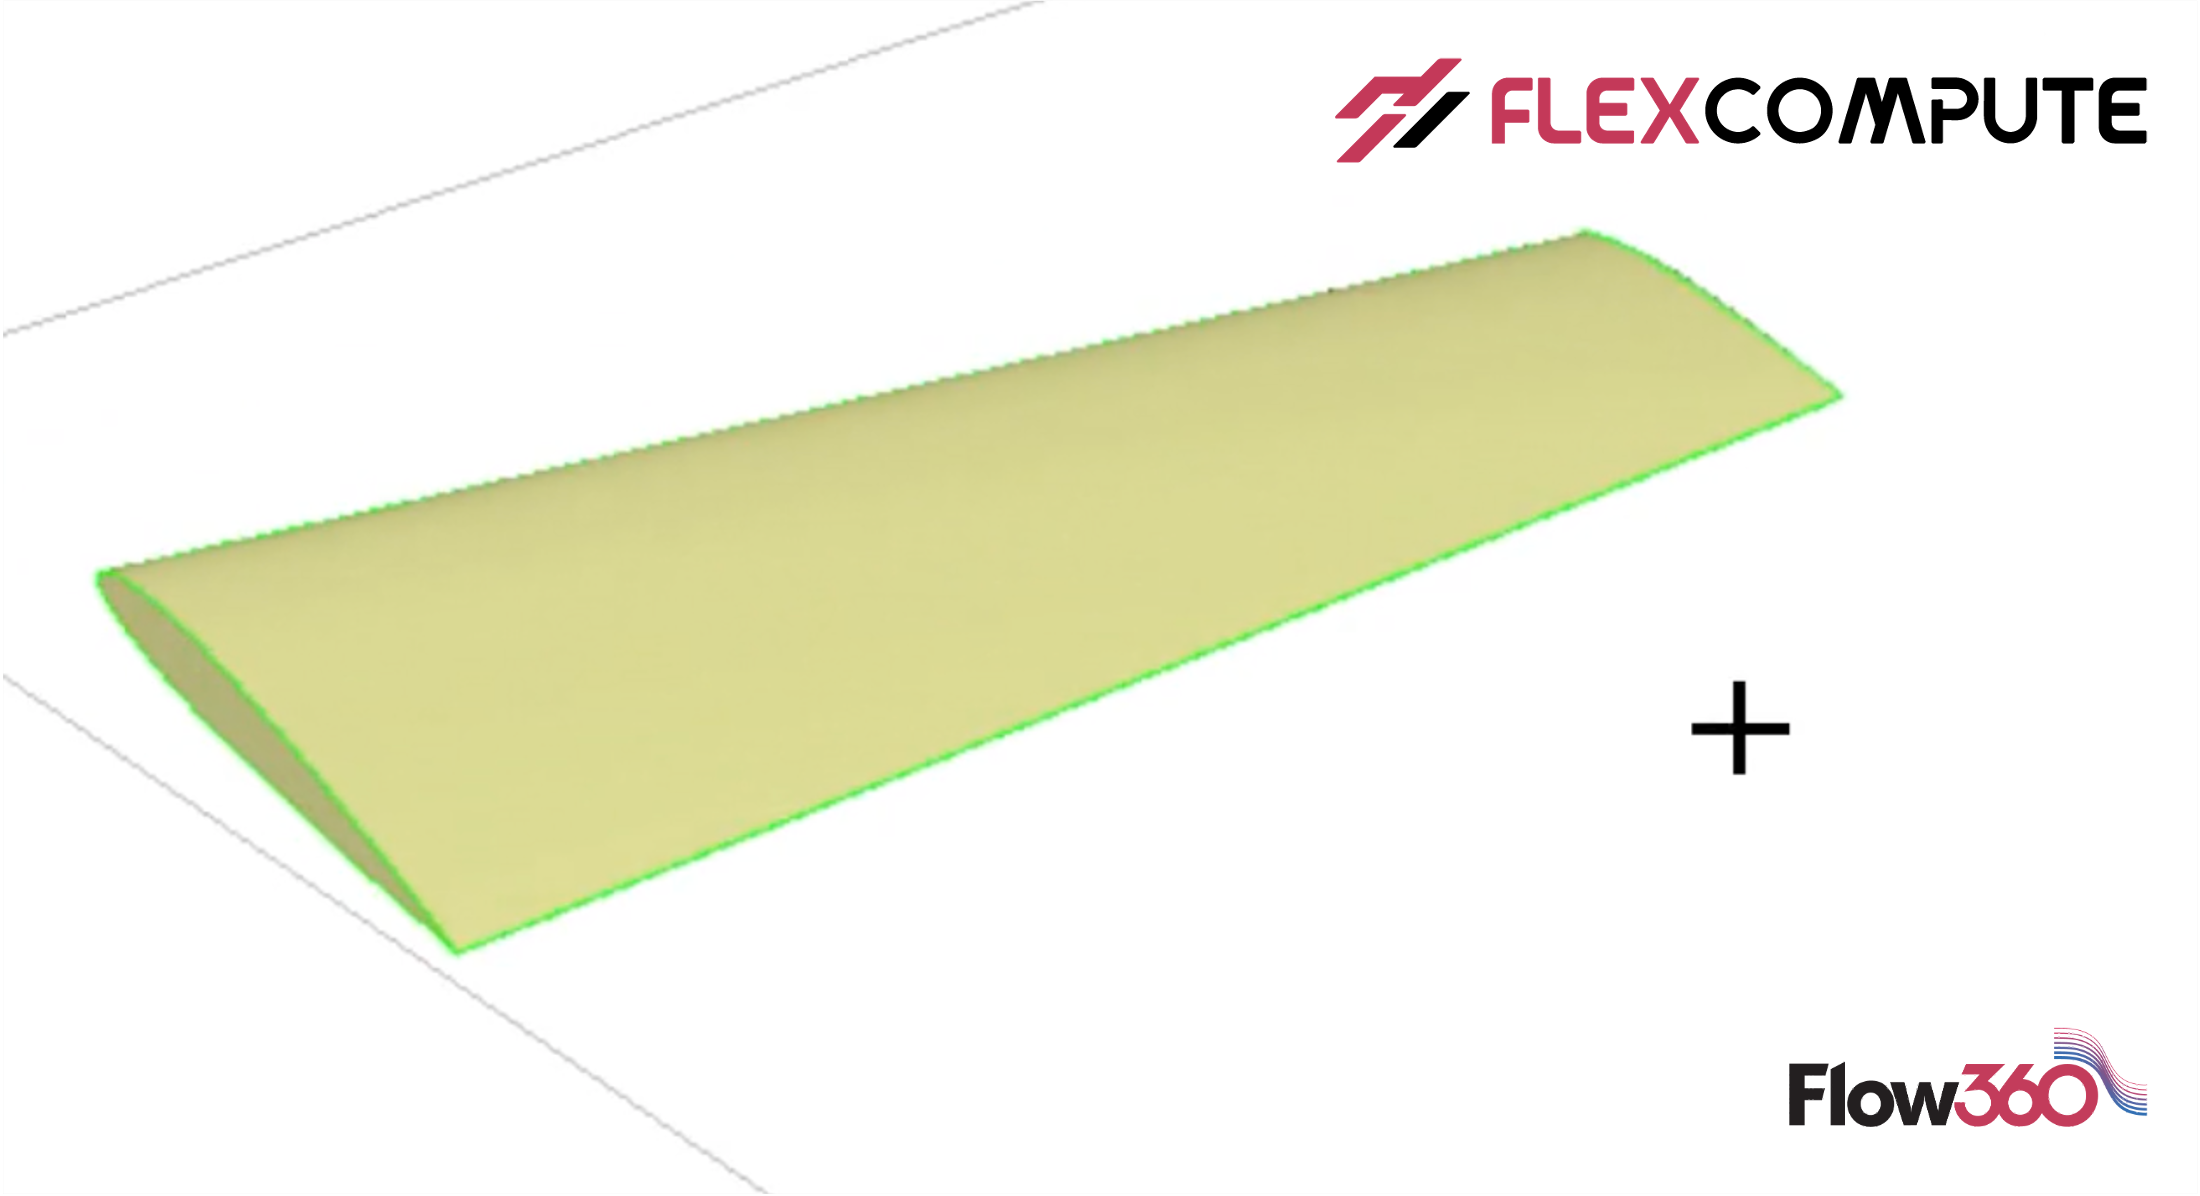 Lecture 1: How to construct an aircraft wing for CFD simulation